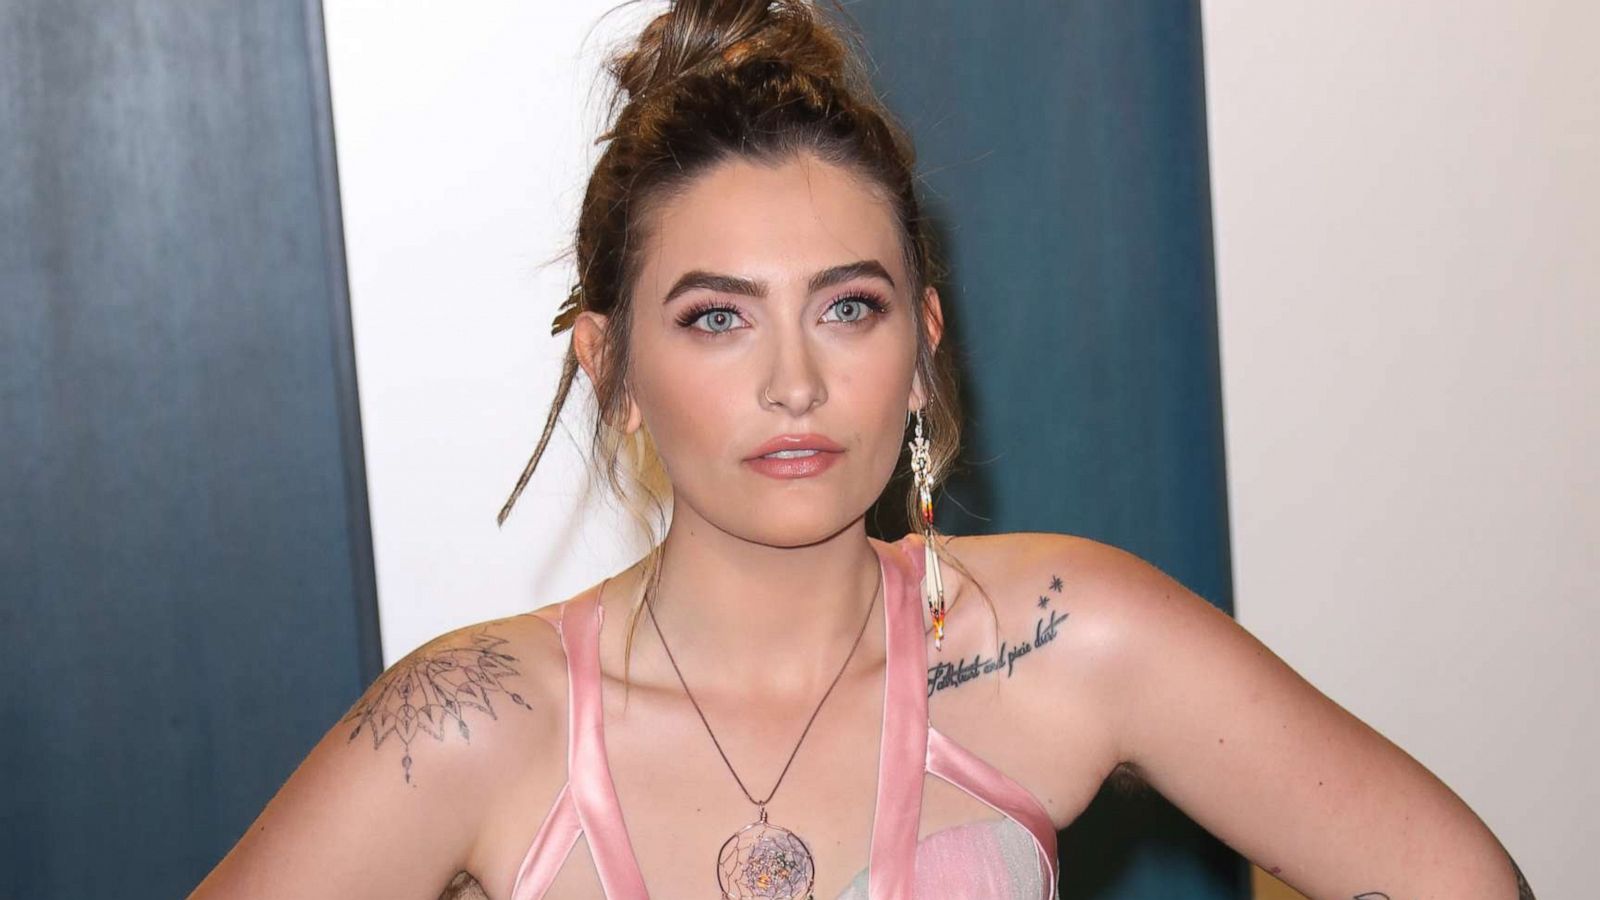 PHOTO: Paris Jackson attends the 2020 Vanity Fair Oscar party, Feb. 9, 2020, in Beverly Hills, Calif.